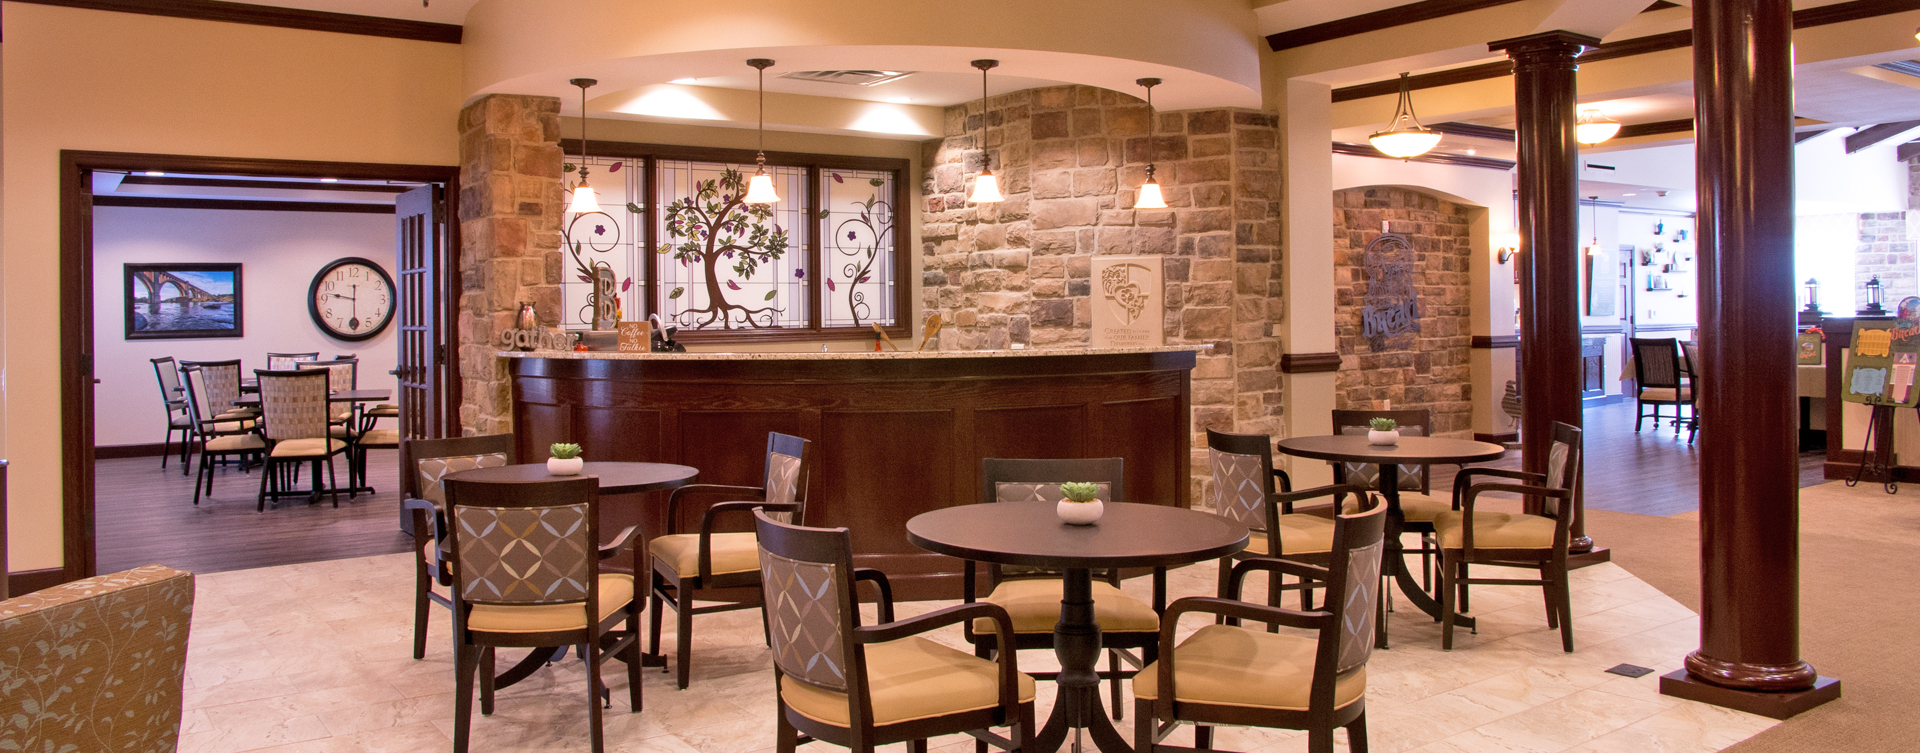 Intimate enough to entertain your closest family; you can even host your next get together in the bistro at Bickford of Chesterfield